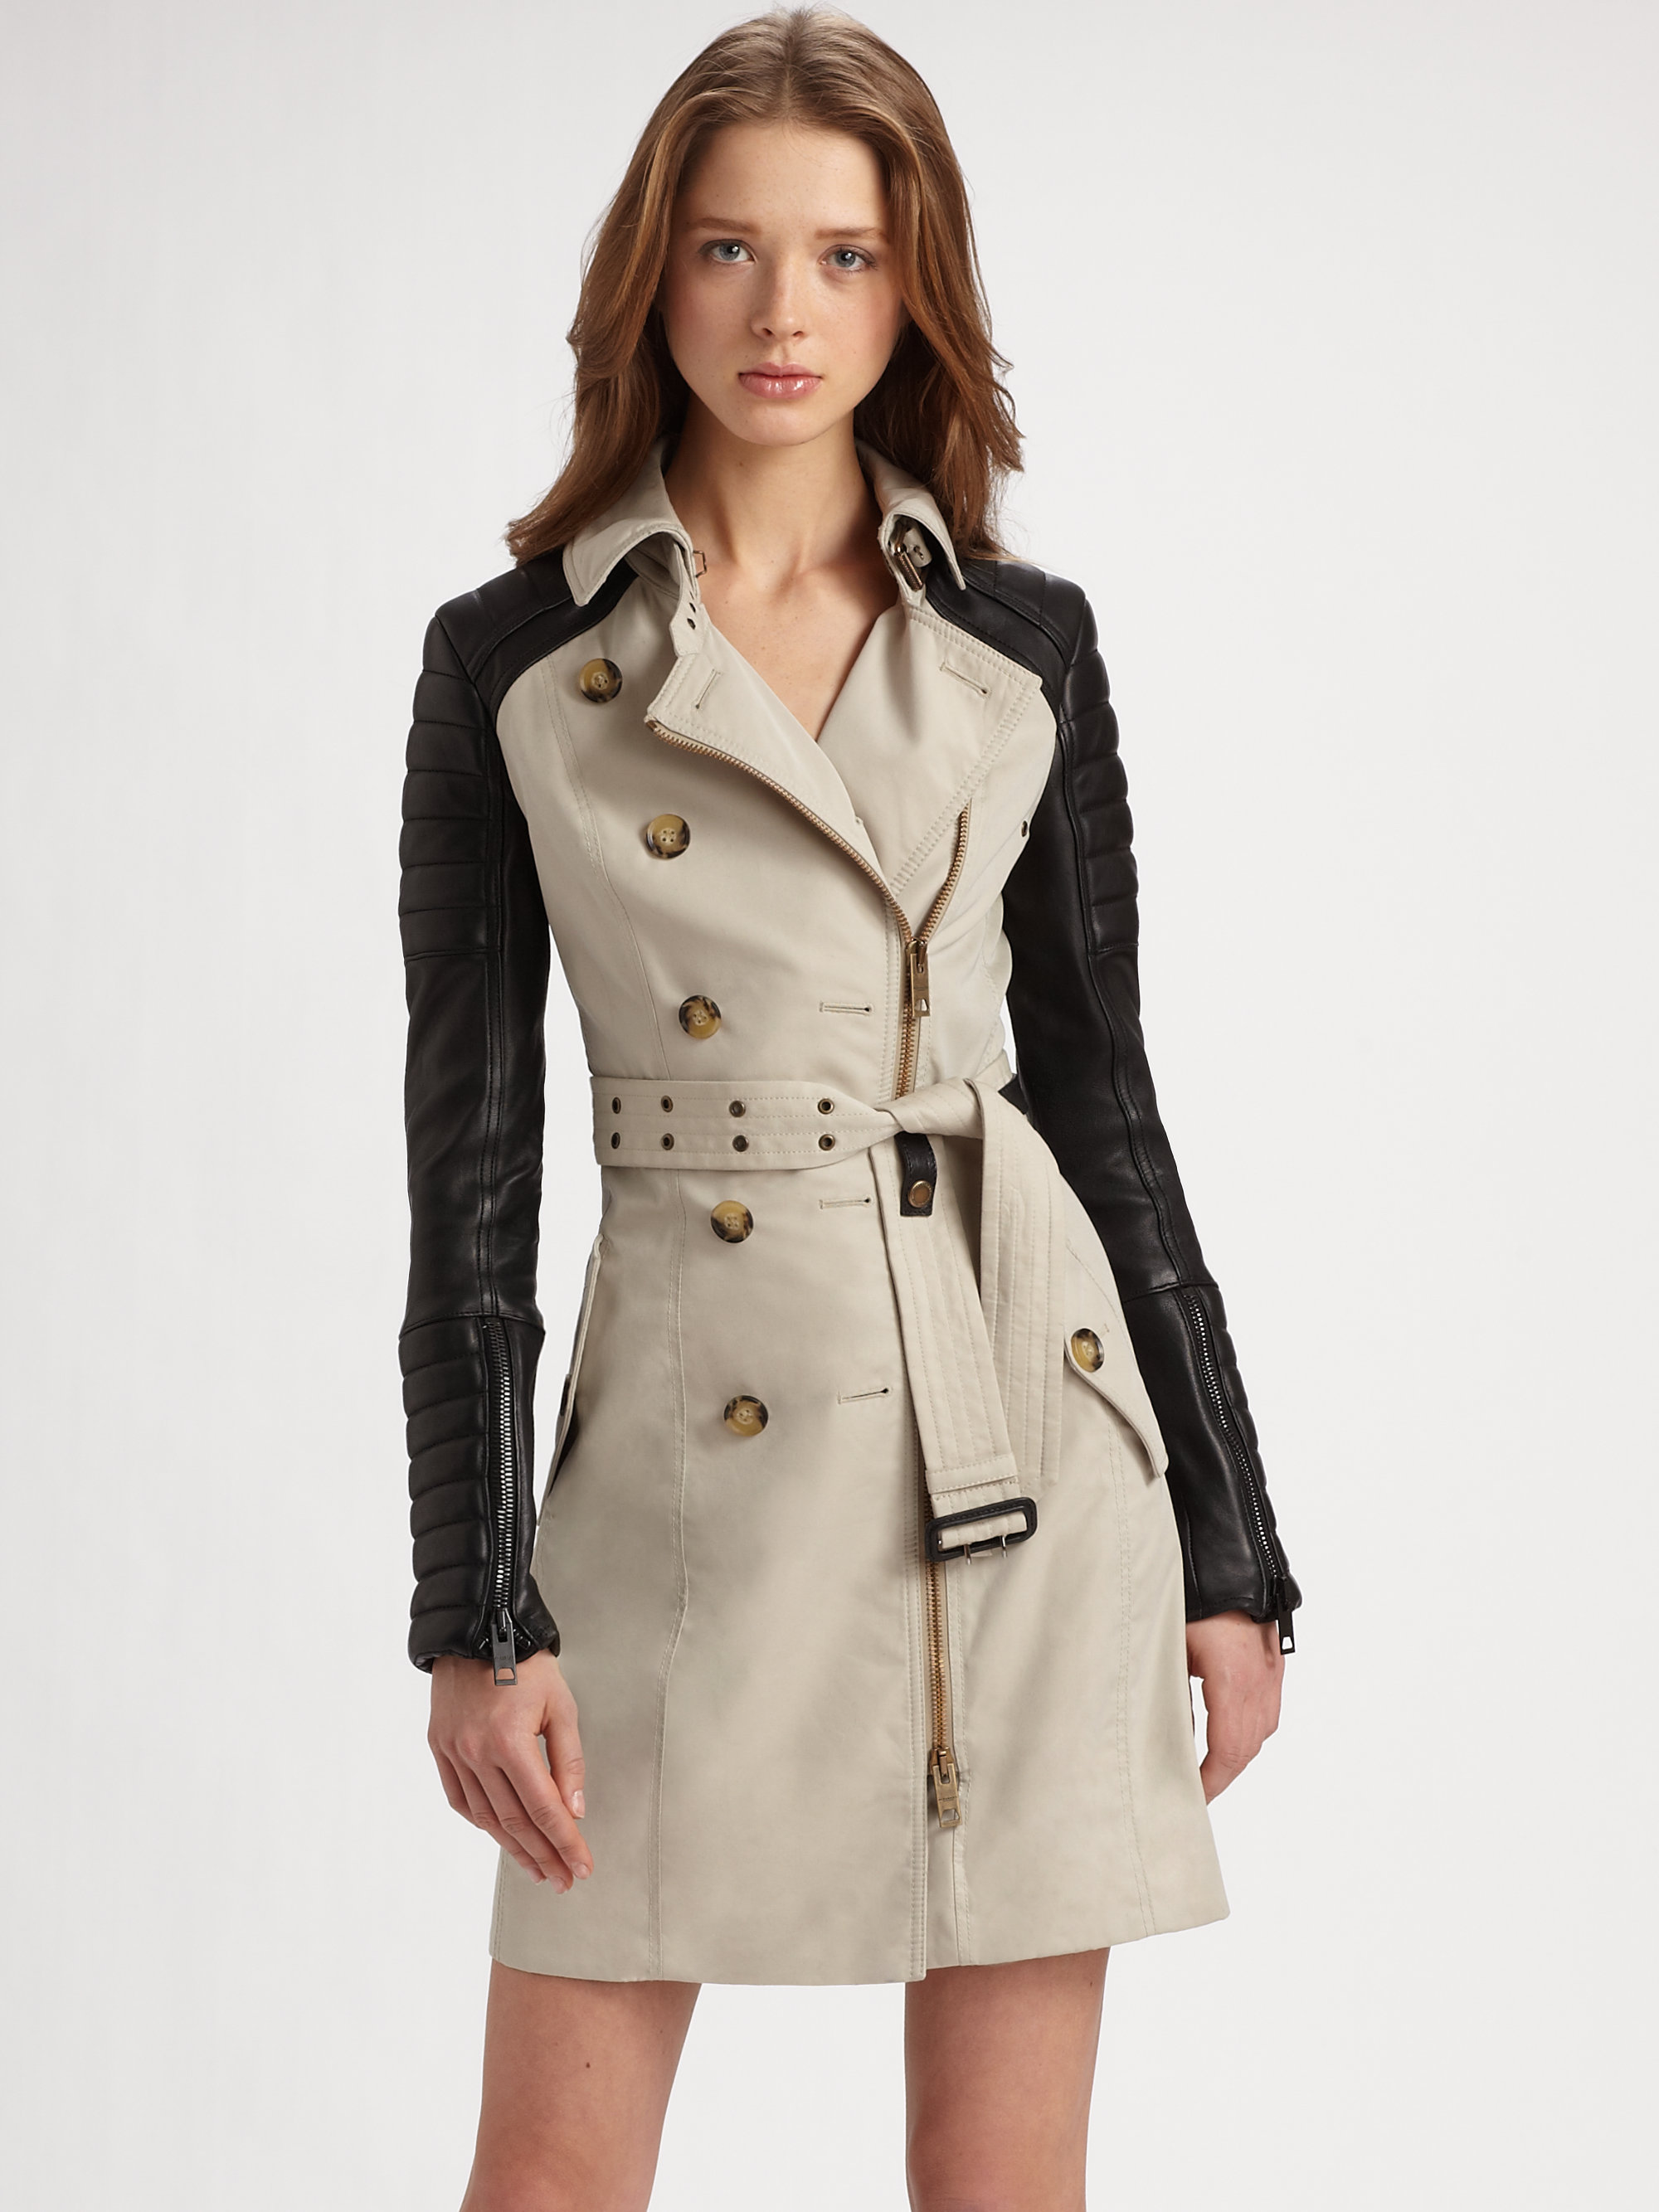 Burberry Prorsum Leather Sleeve Trenchcoat in Natural | Lyst